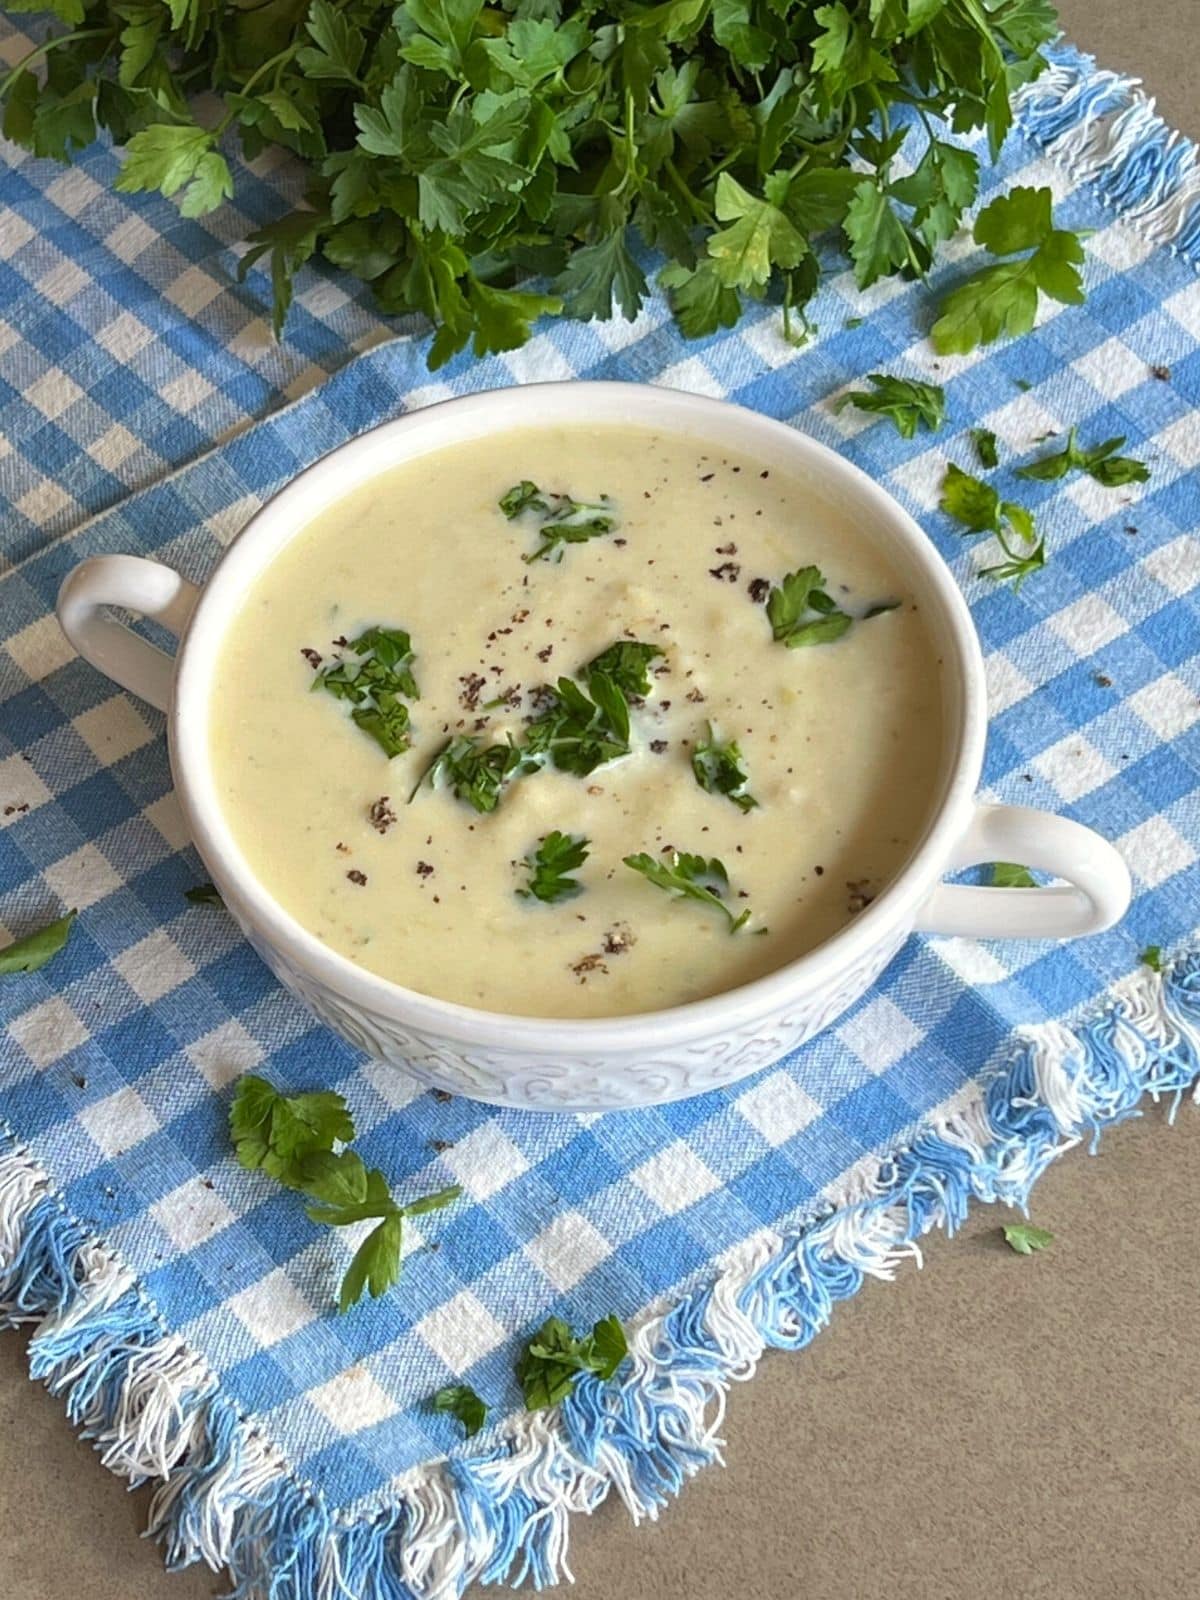 Cullen skink soup in white bowl with fresh parsley garnish.